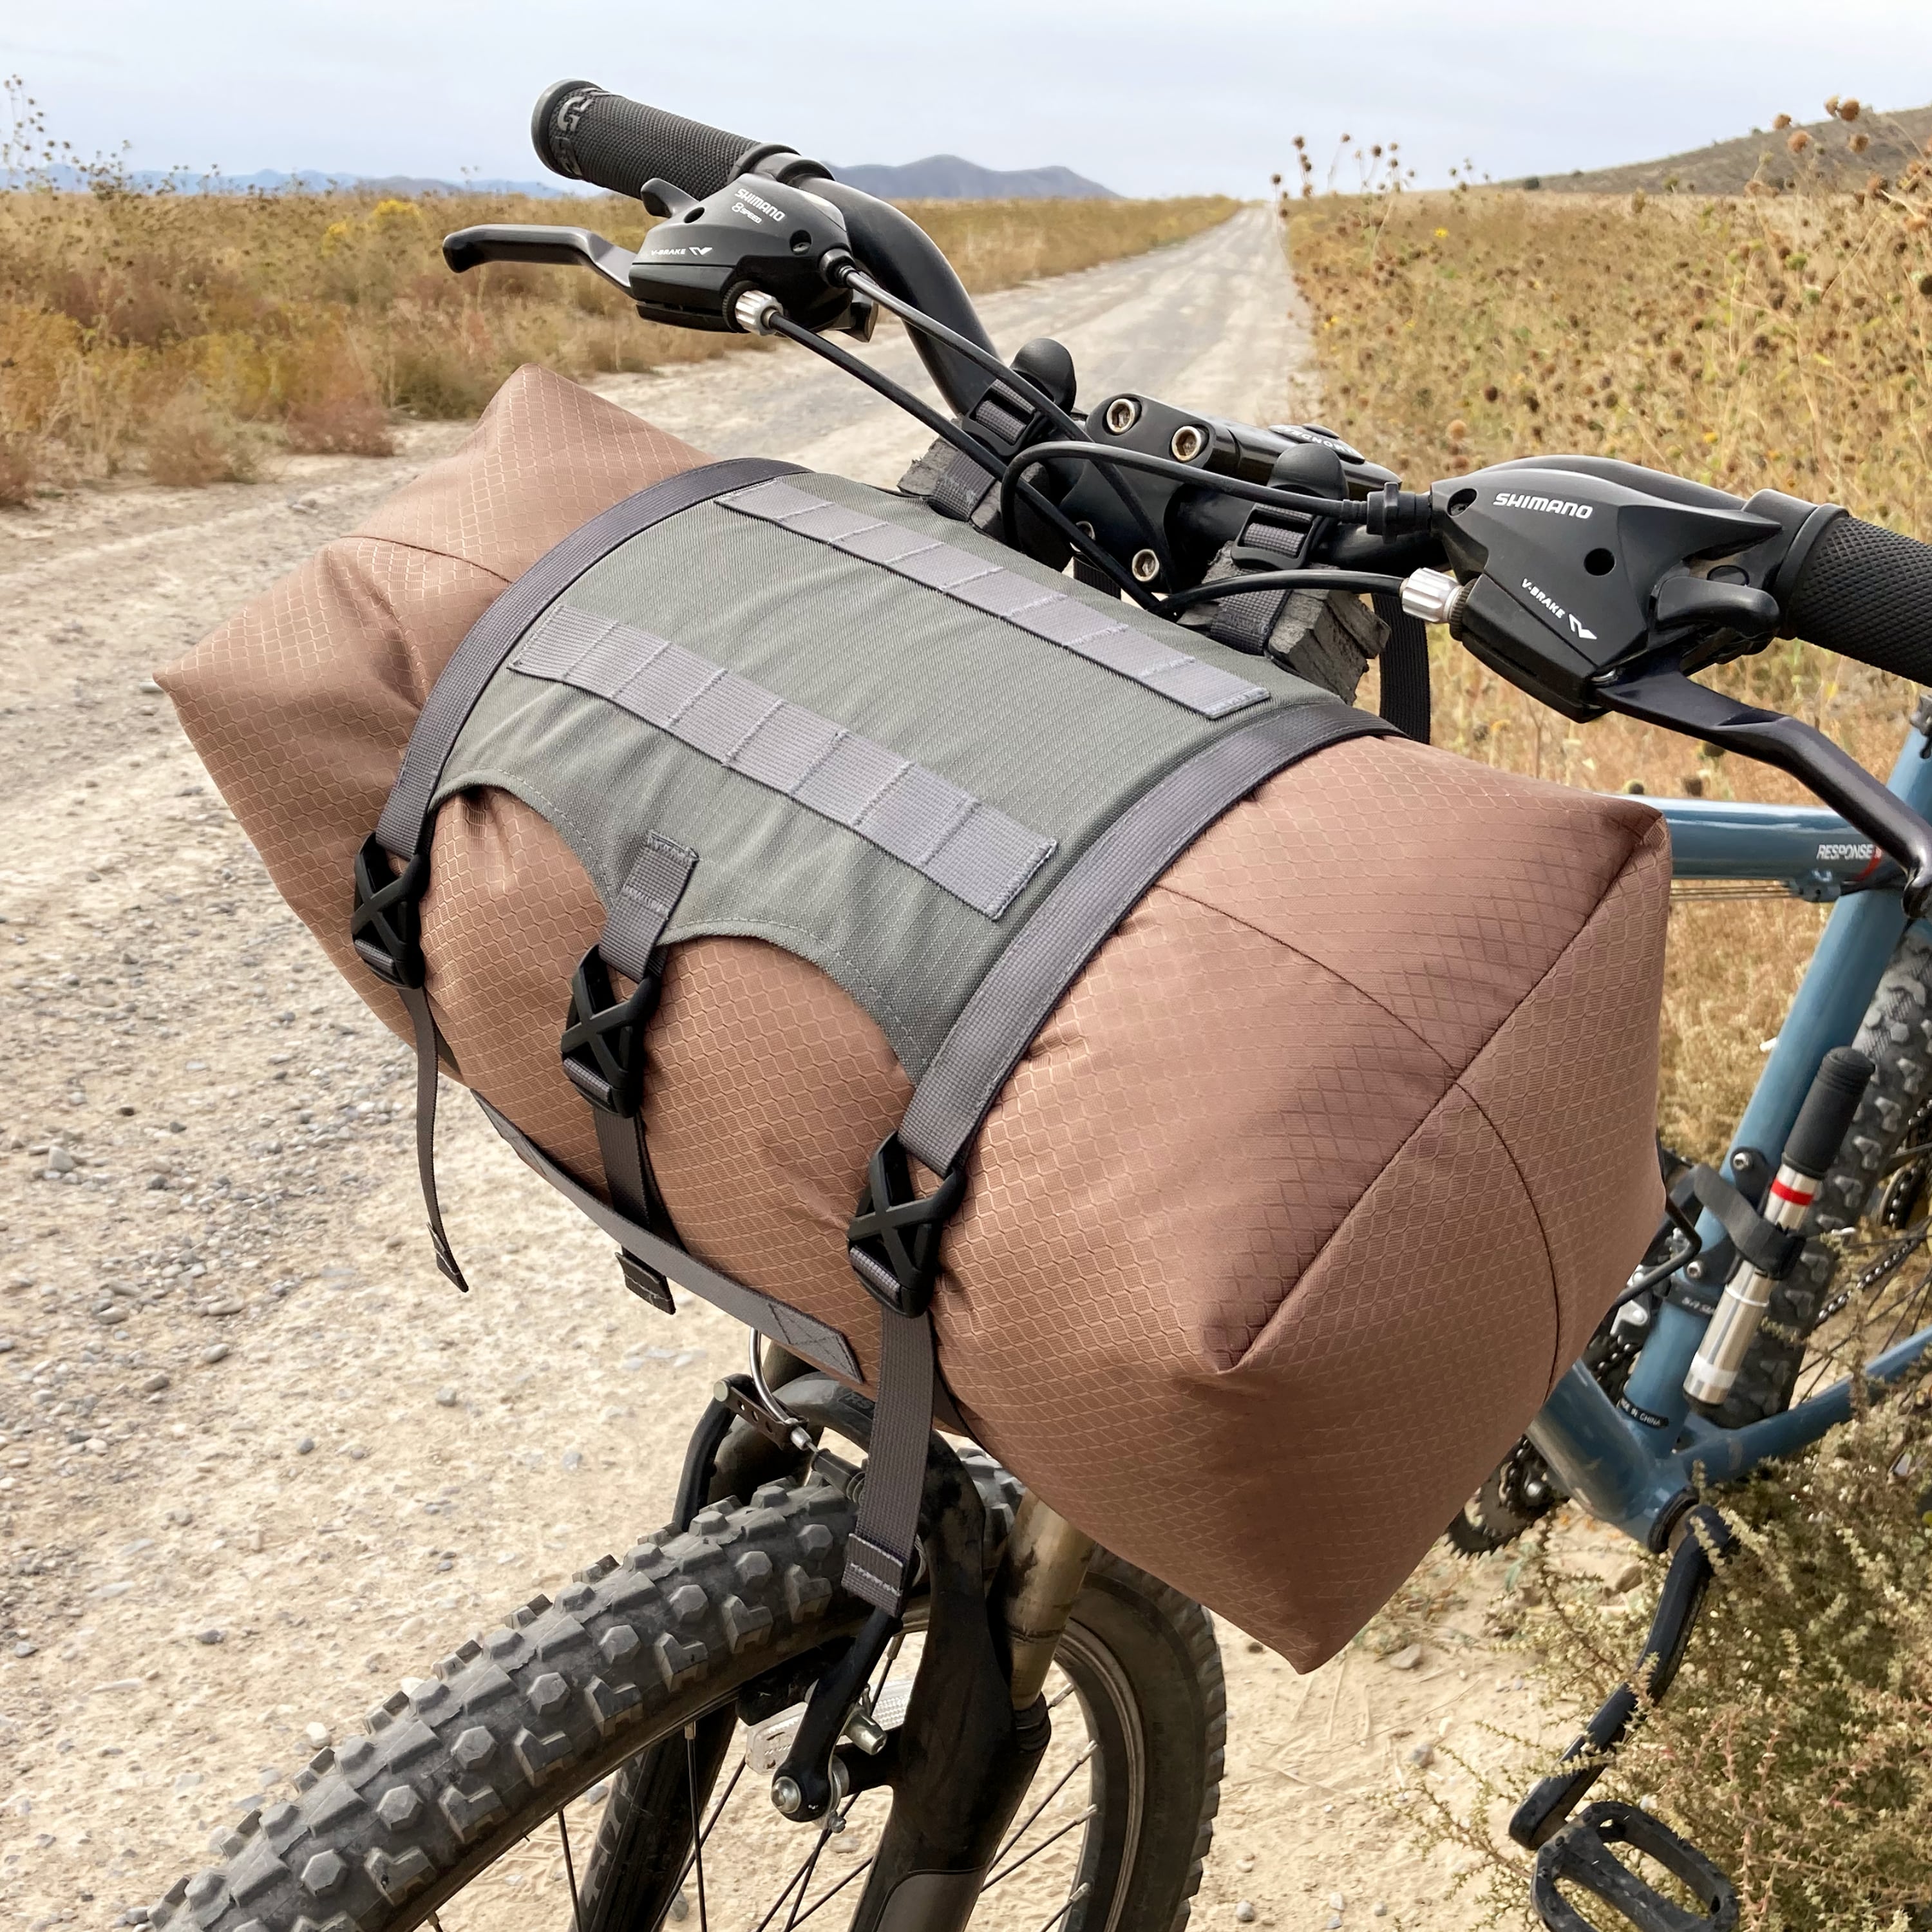 DIY sewing pattern of a handle bar bike bag to make your own gear